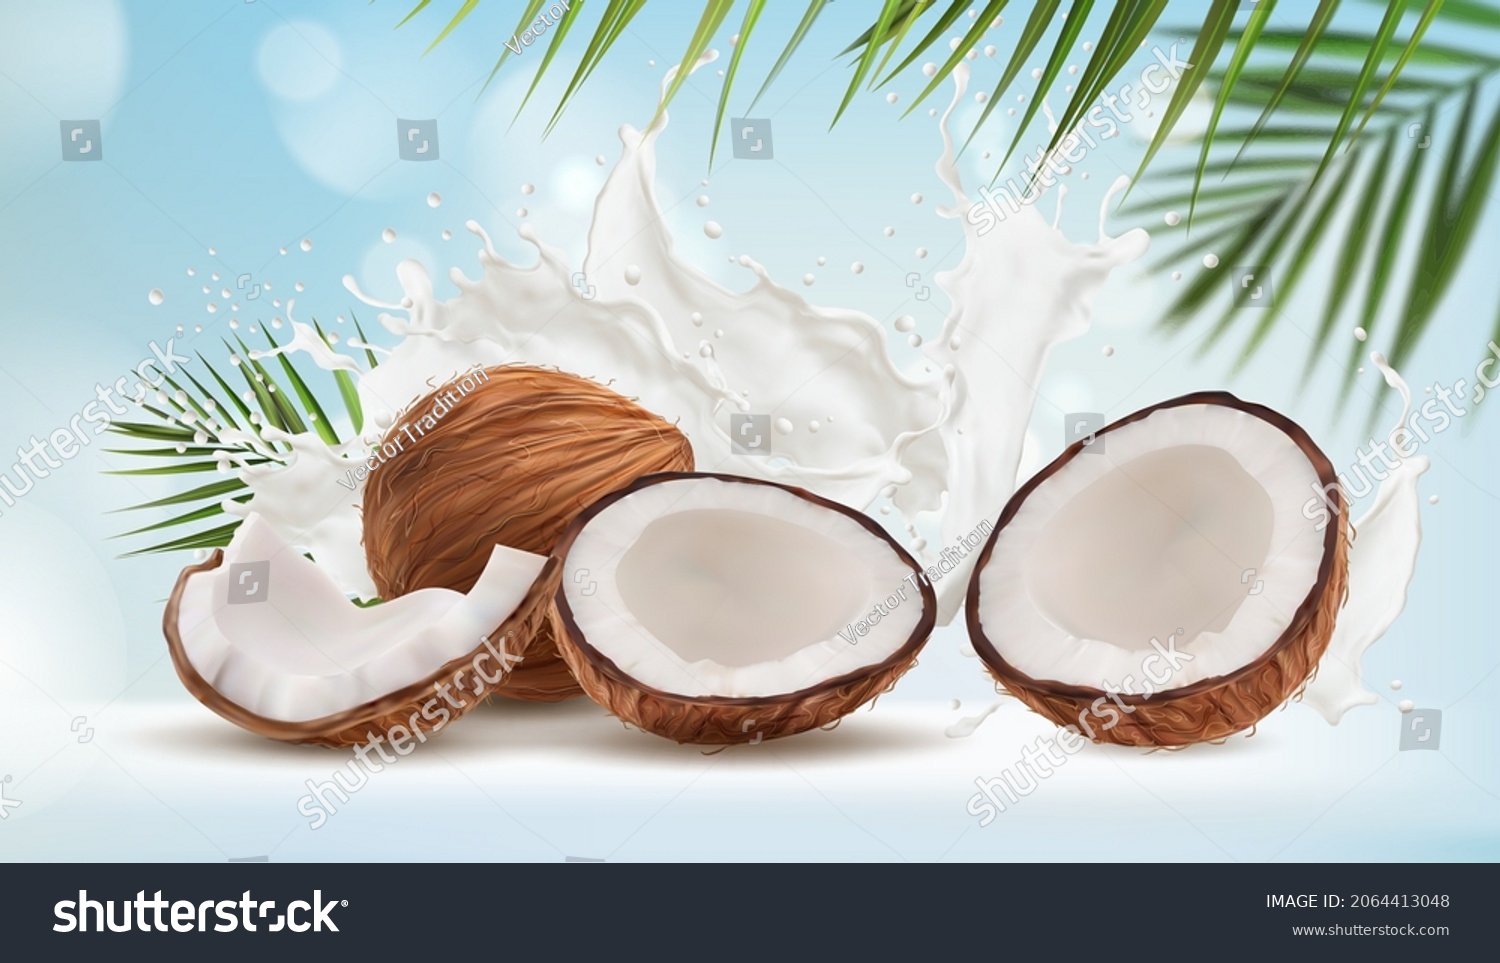 SVG of Coconut milk splash and palm leaves, vector bokeh background. Cracked coconut nuts on milk splash with tropical exotic blue bokeh background for food sweets, spa cosmetics or cream packaging svg